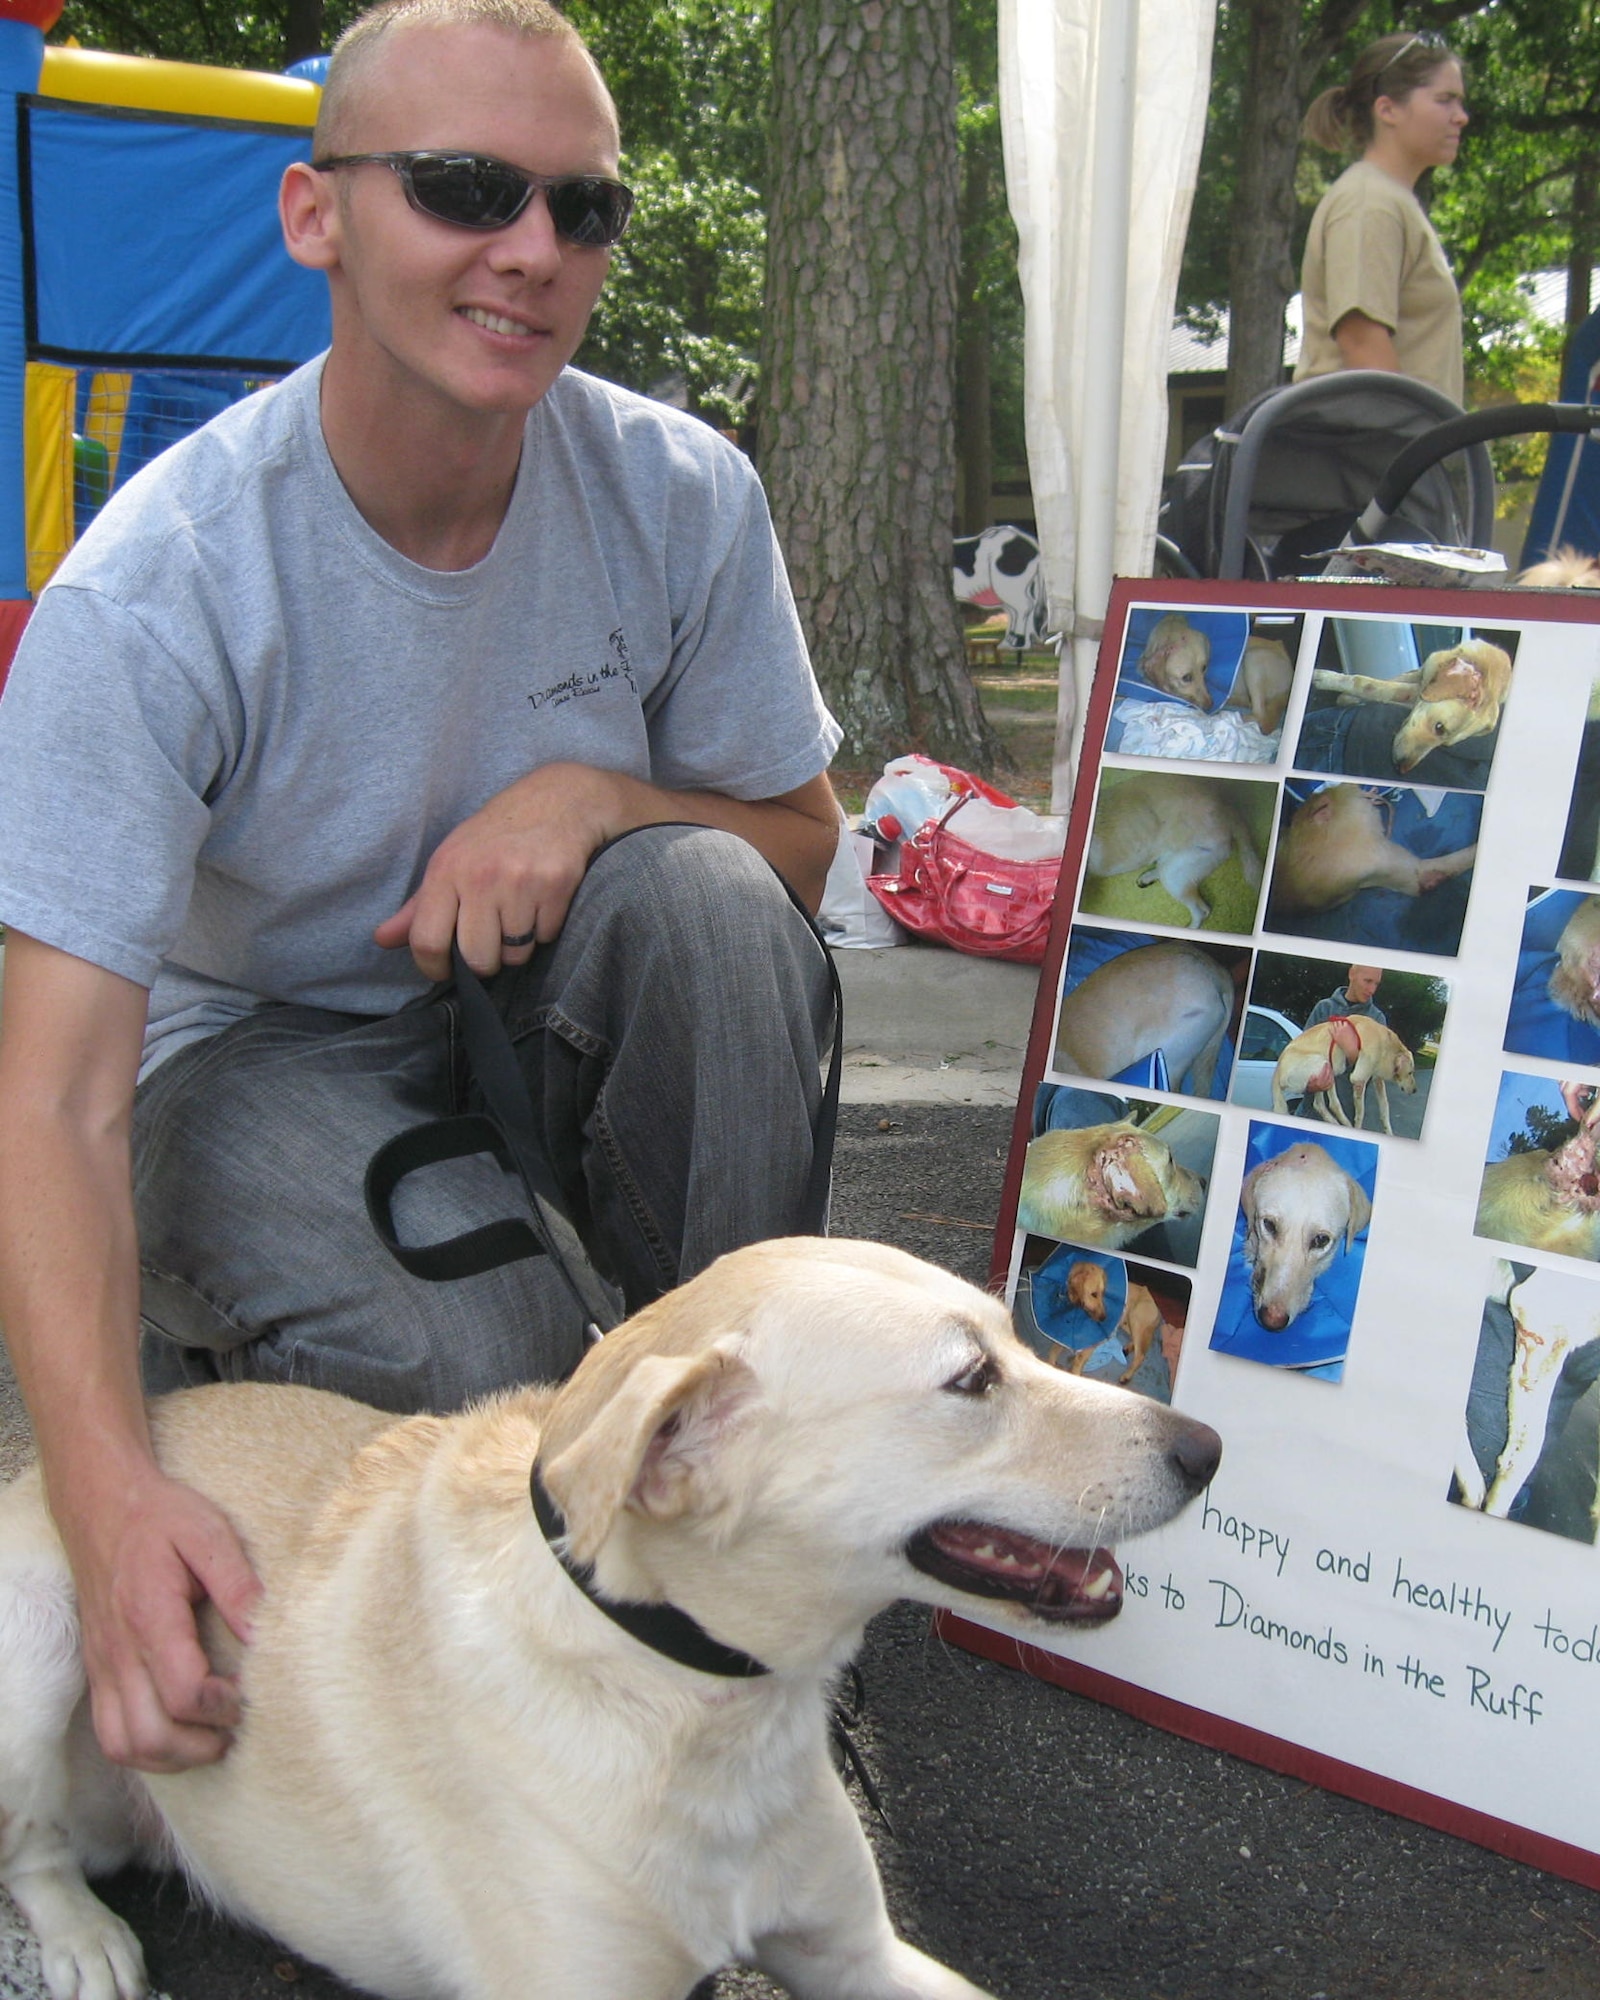 Staff Sgt. Travis Davis, 4th Civil Engineer Squadron unaccompanied housing manager, pets his dog Lucky during a Pet Fair hosted by the Southern Pines Inn on Seymour Johnson Air Force Base, N.C., Sept. 19, 2009. The poster by Sergeant Davis’ side chronicles the condition Lucky was in when he was rescued by Diamonds in the Ruff and the care the non-profit organization provided for him. The agency saved Lucky’s life. (U.S. Air Force photo by Tech. Sgt. Tammie Moore)